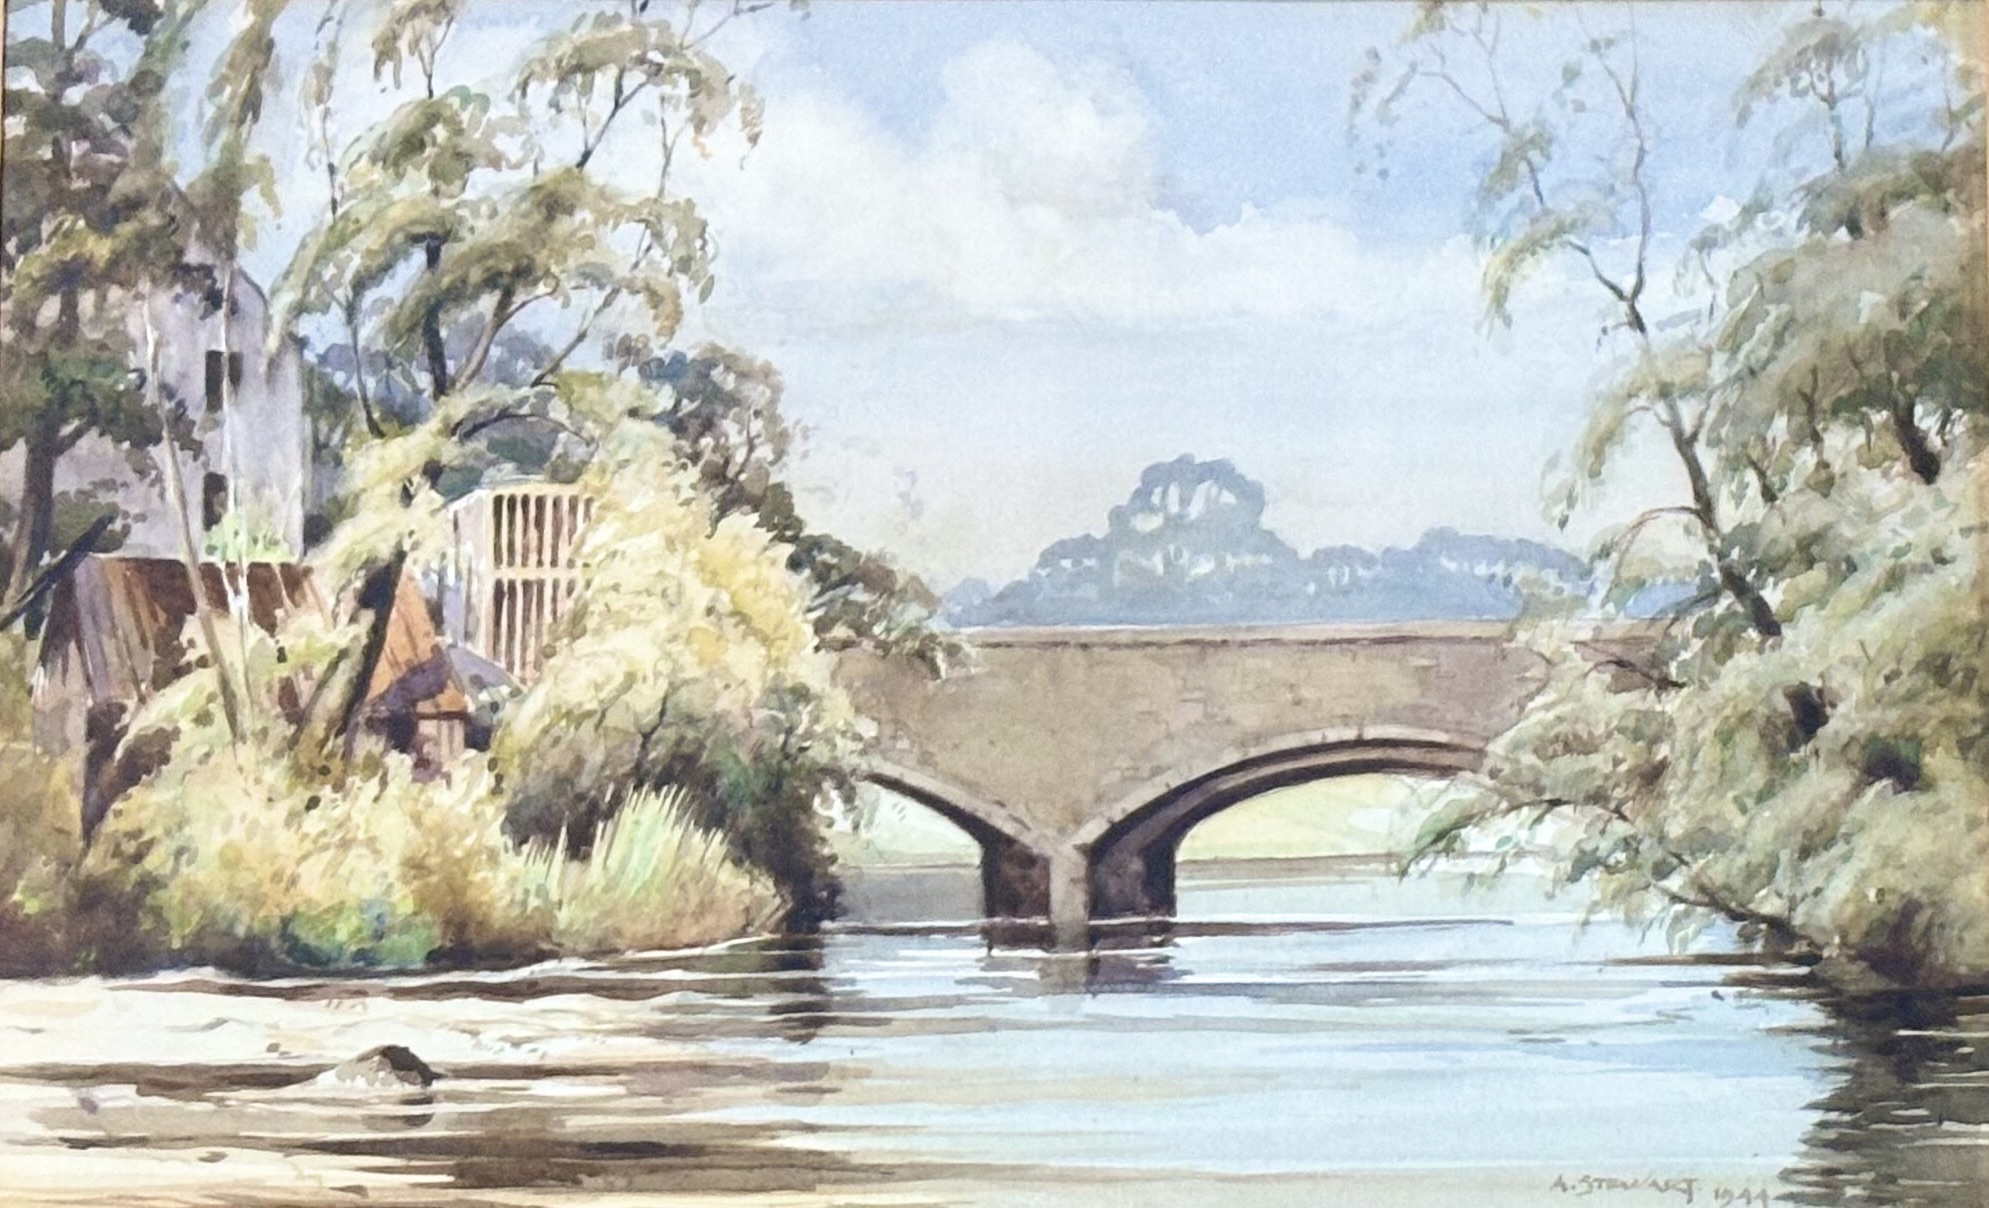 A. Stewart, riverbank bridge scene ,watercolour on paper, signed and dated 1944 bottom right in a